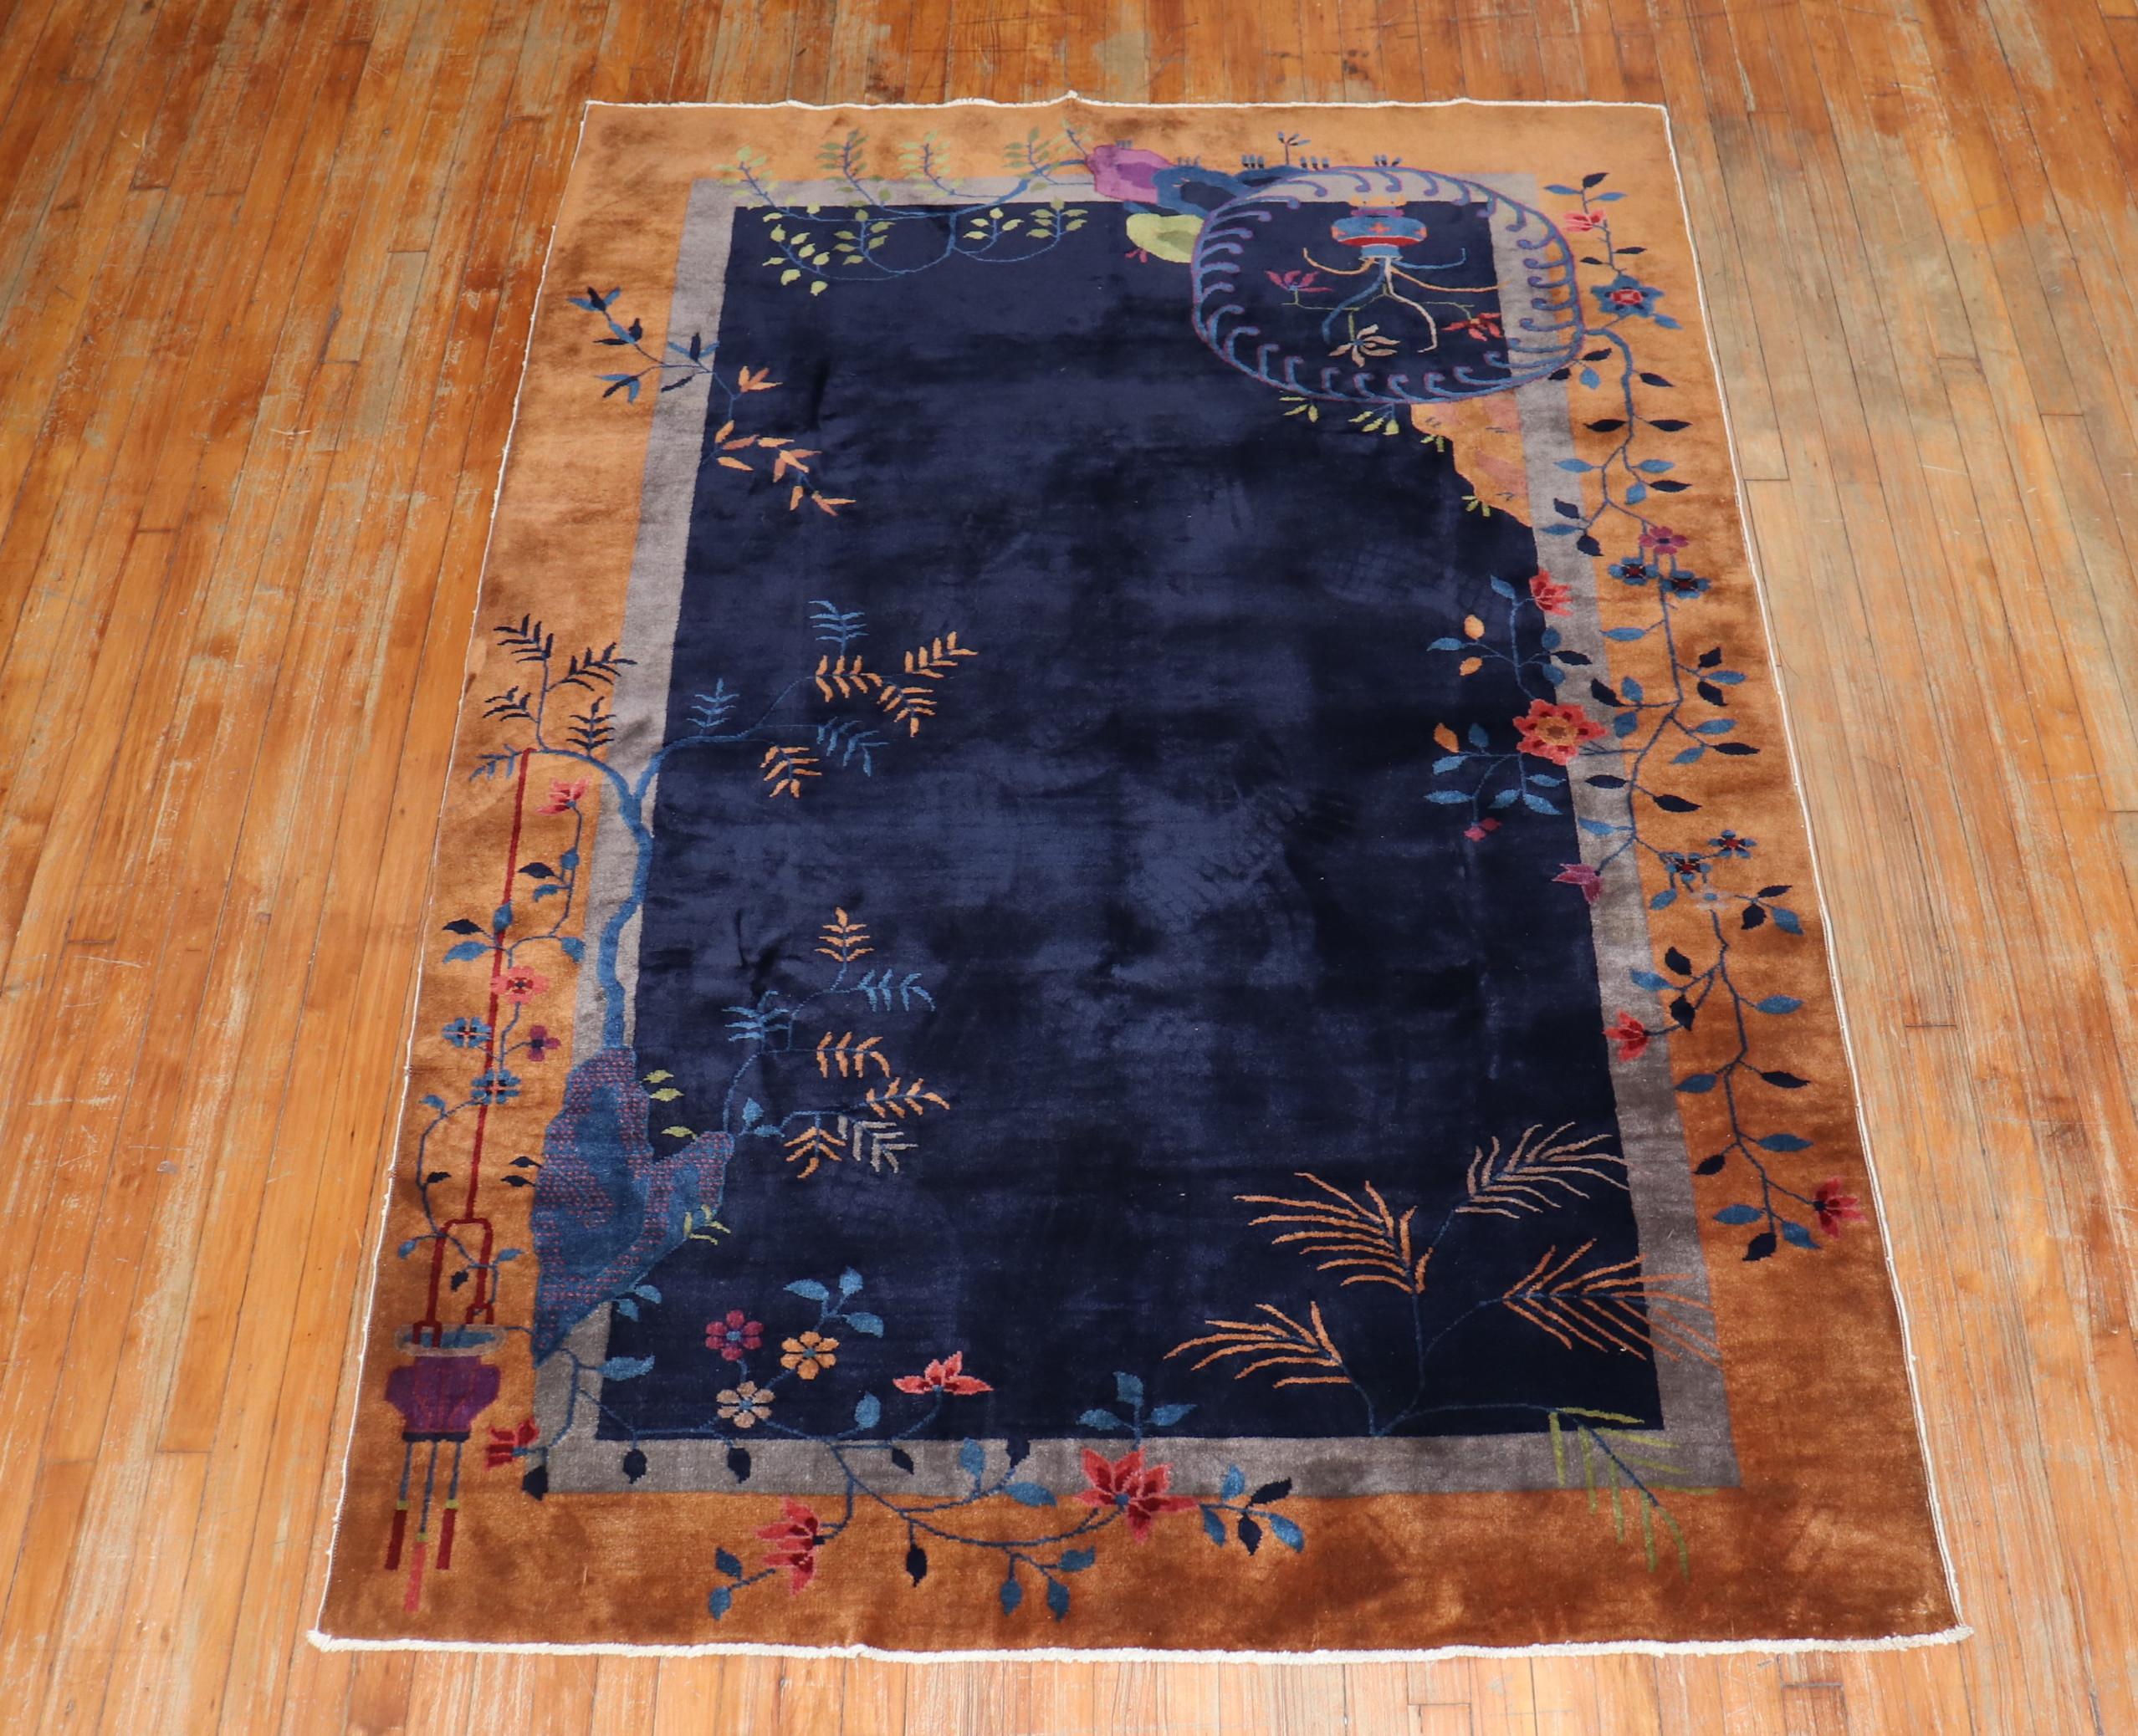 An authentic mid-20th century Chinese Art Deco with a spacious open field design in midnight blue. Art Deco rugs formats are usually found in the 3 x 5, 8 x 10, 9 x 12 size range, this one is in the 5 x 7 range. The condition on this is excellent